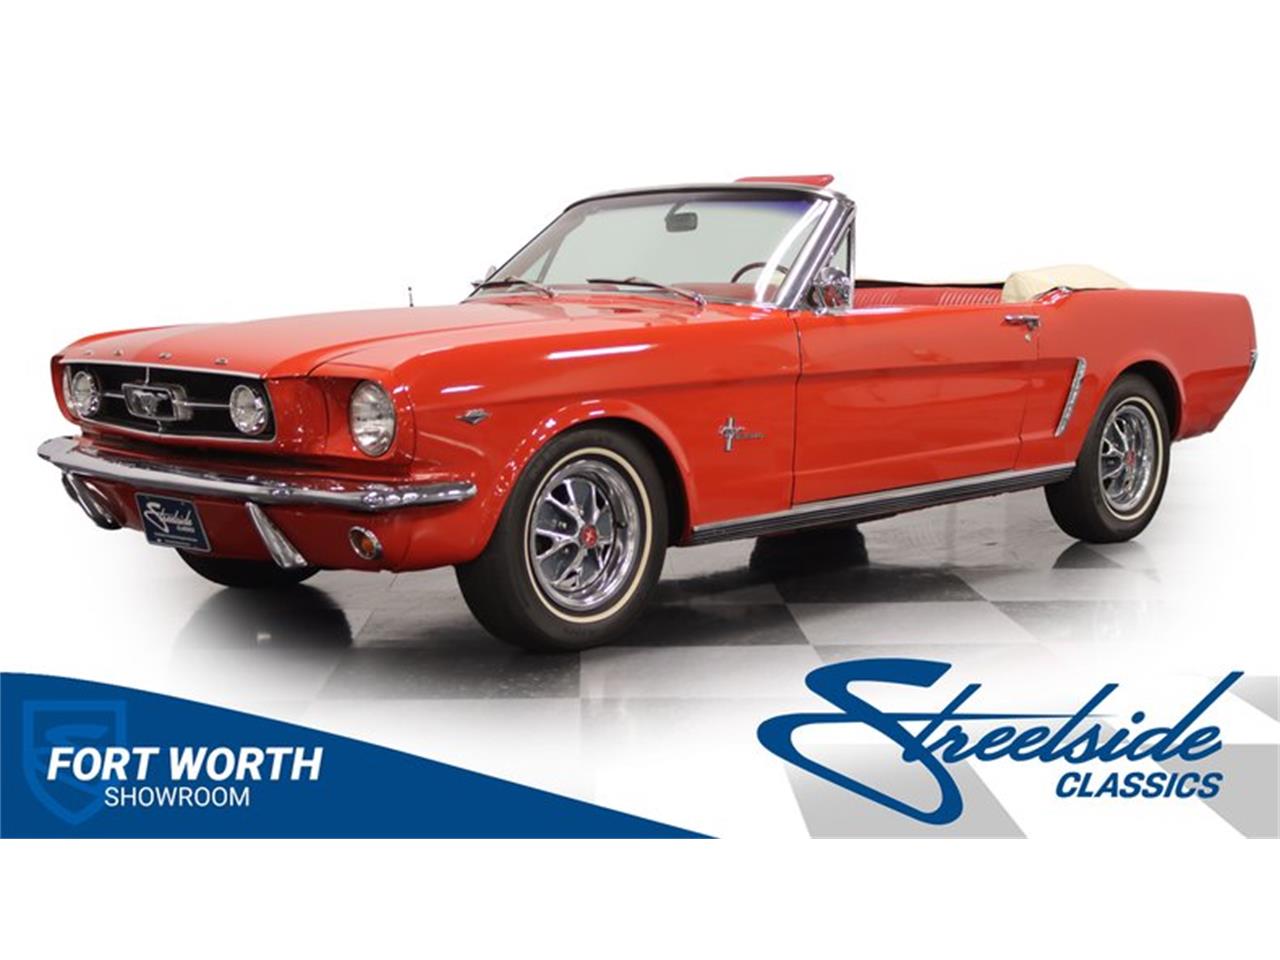 For Sale: 1965 Ford Mustang in Ft Worth, Texas for sale in Fort Worth, TX